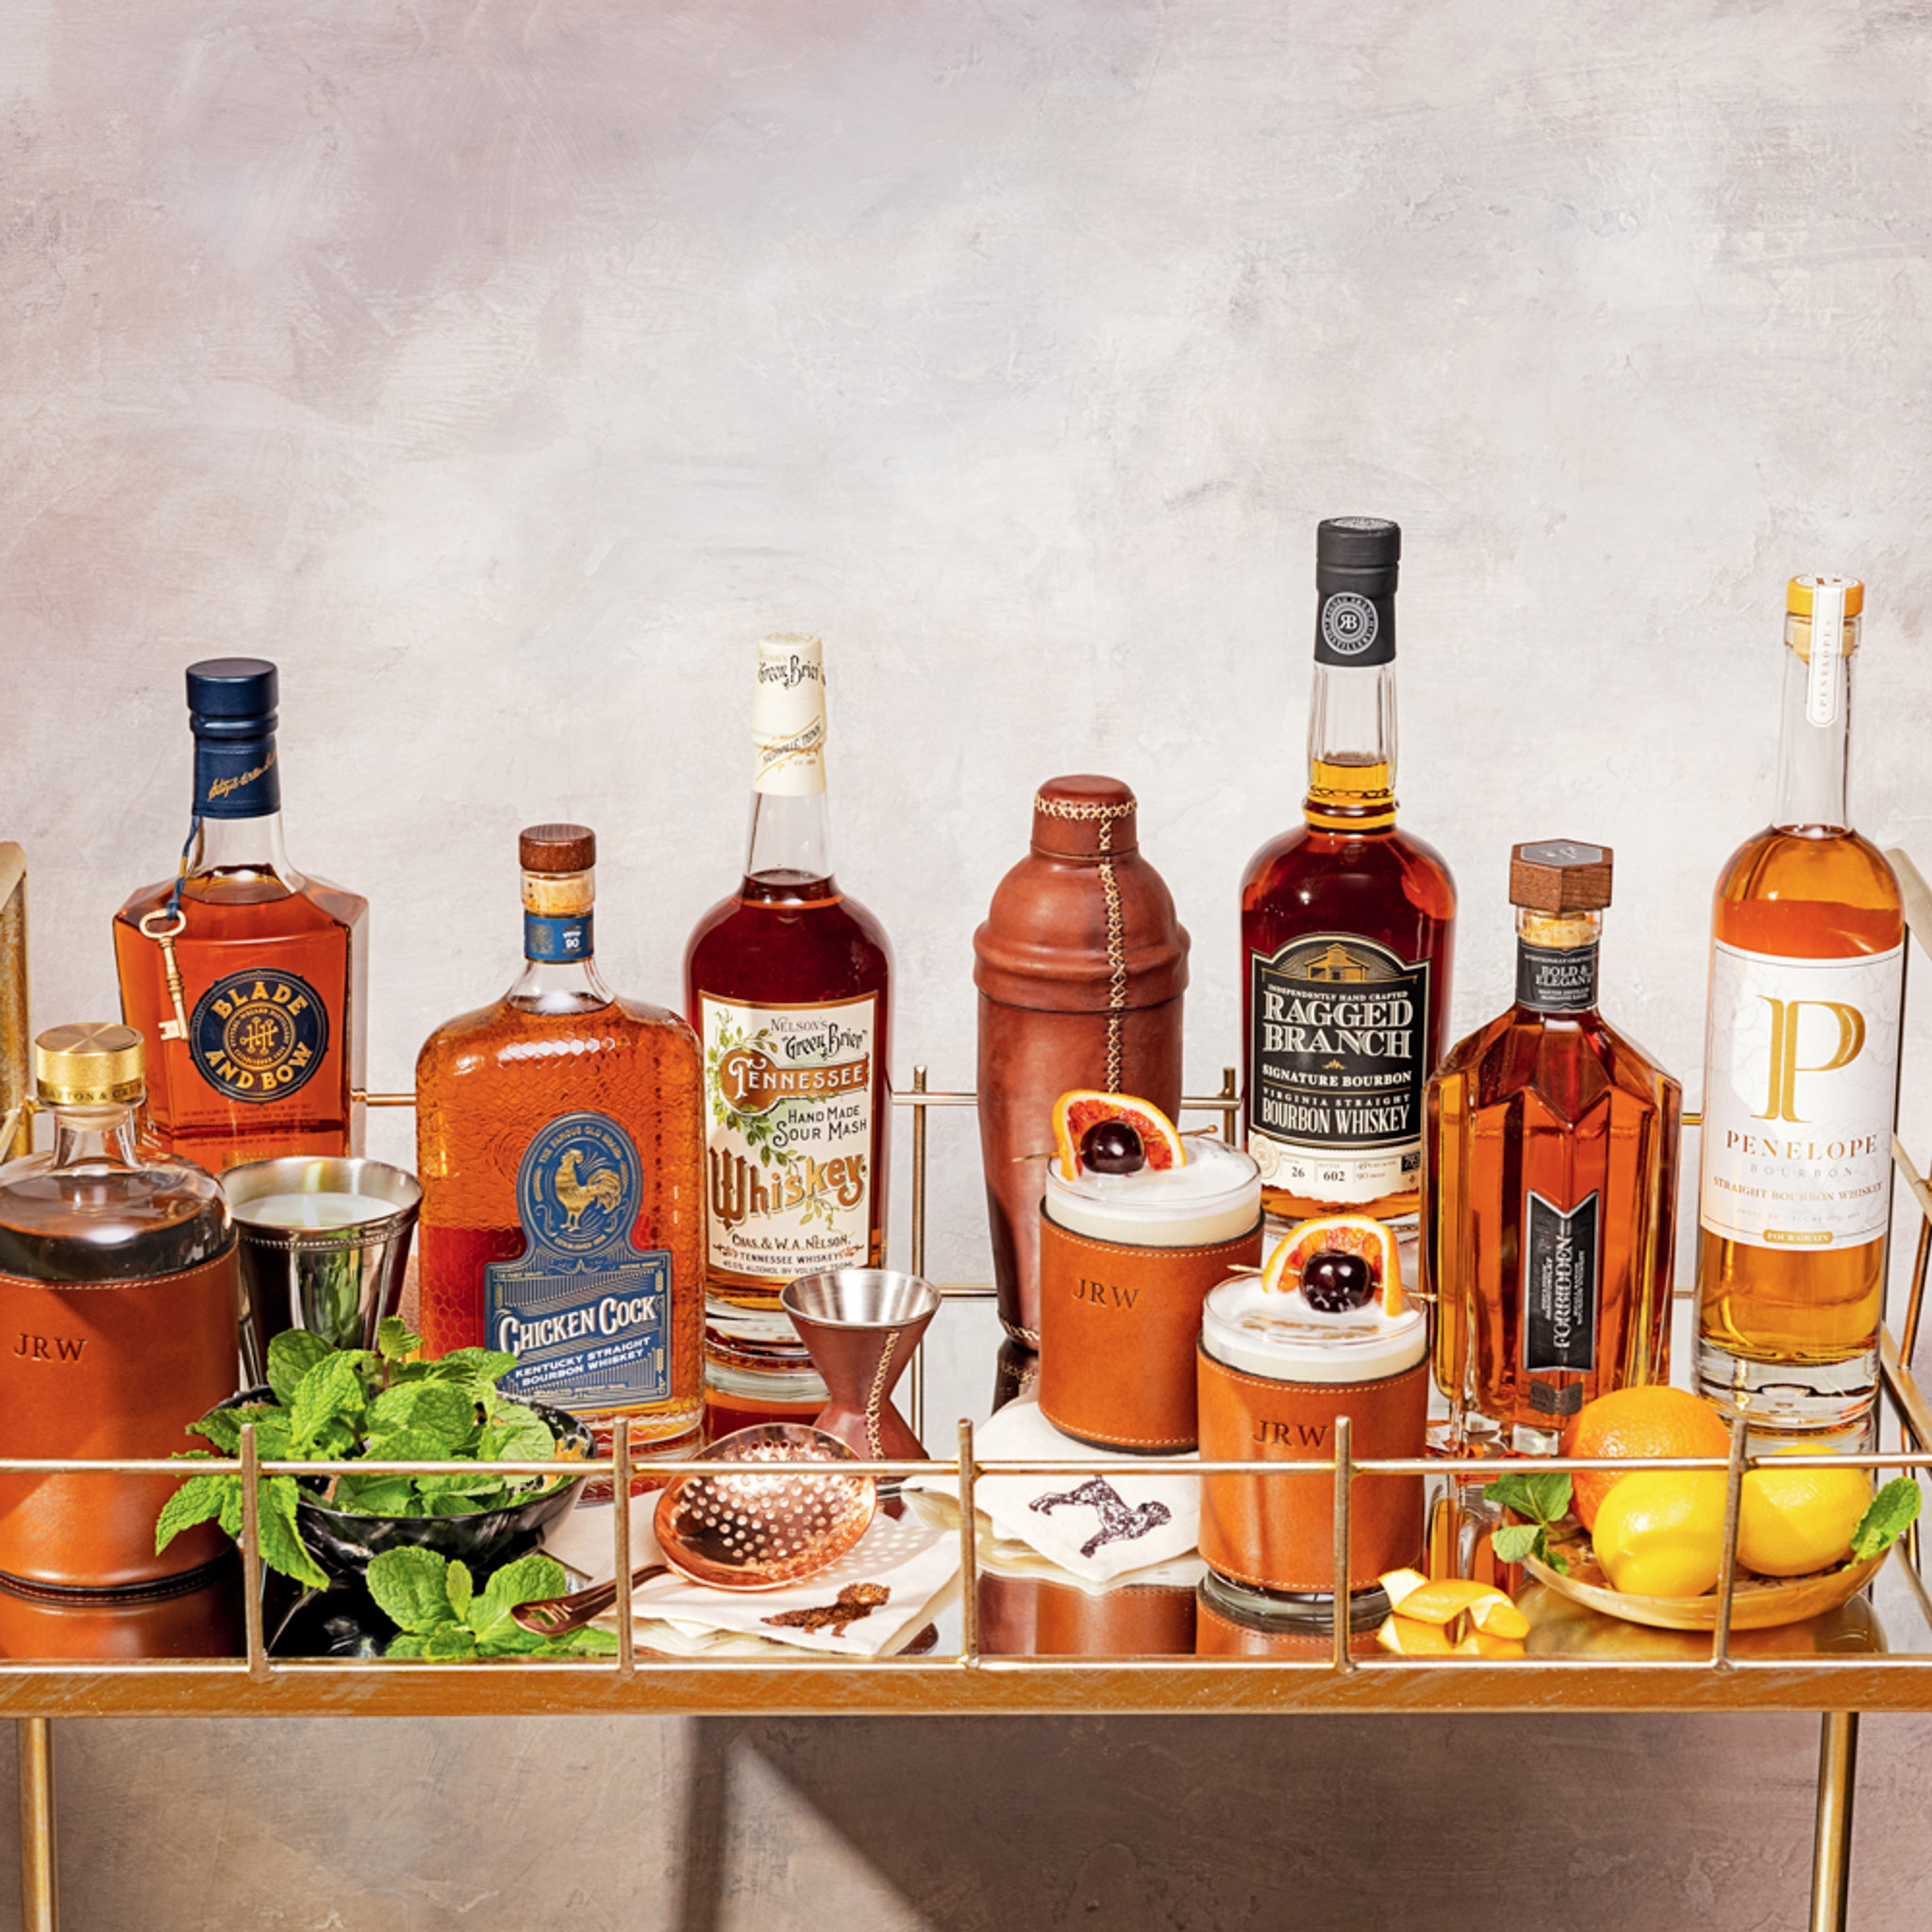 Bar cart with bottles, barware and cocktail napkins